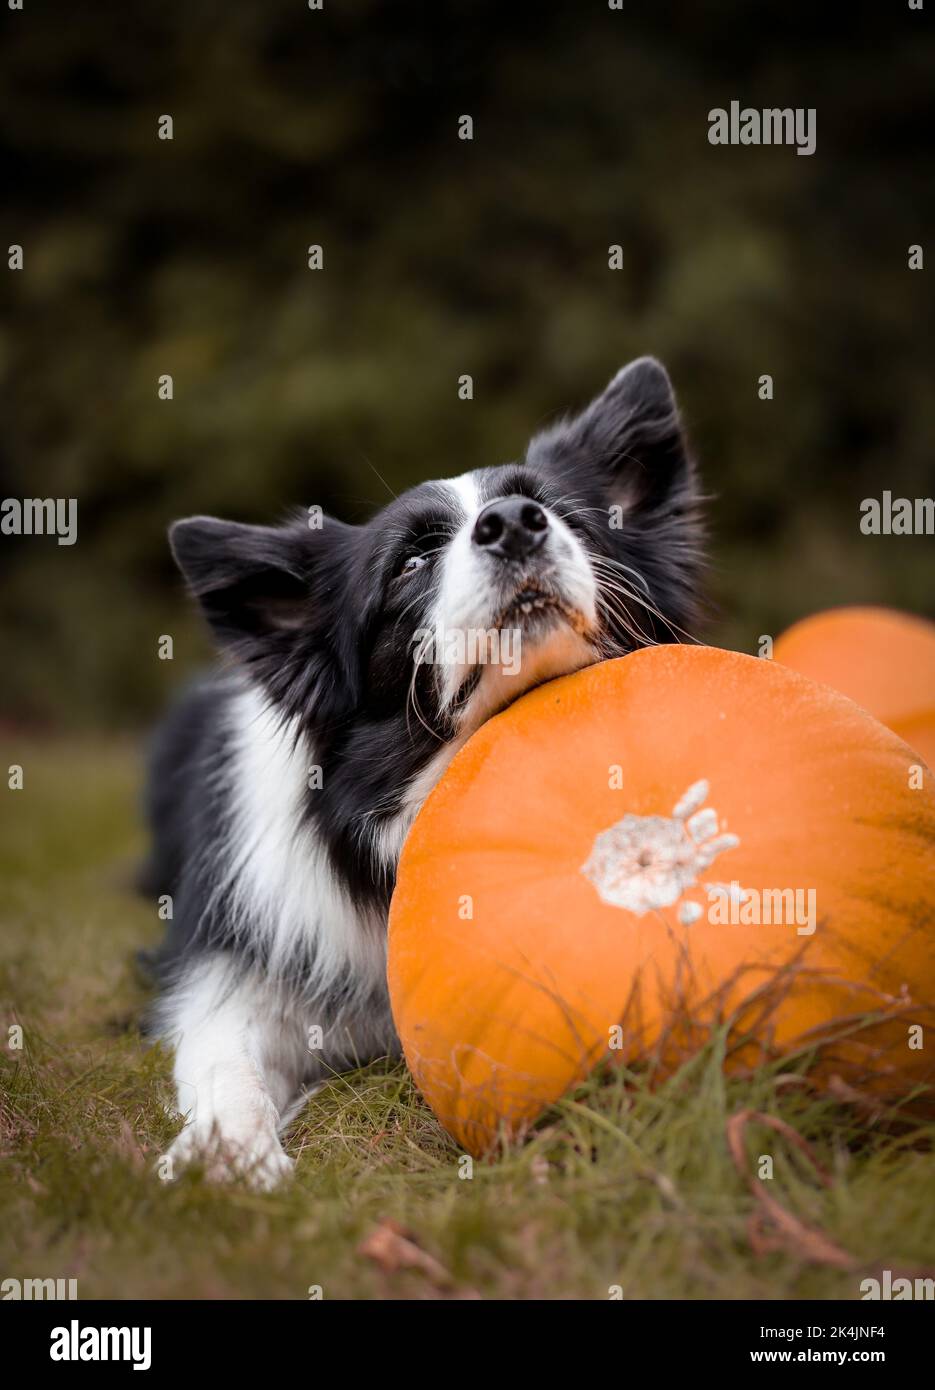 Vertical Portrait of Border Collie with Orange Pumpkin in the Garden. Cute Black and White Dog Lies Down Outside with Cucurbita Pepo. Stock Photo